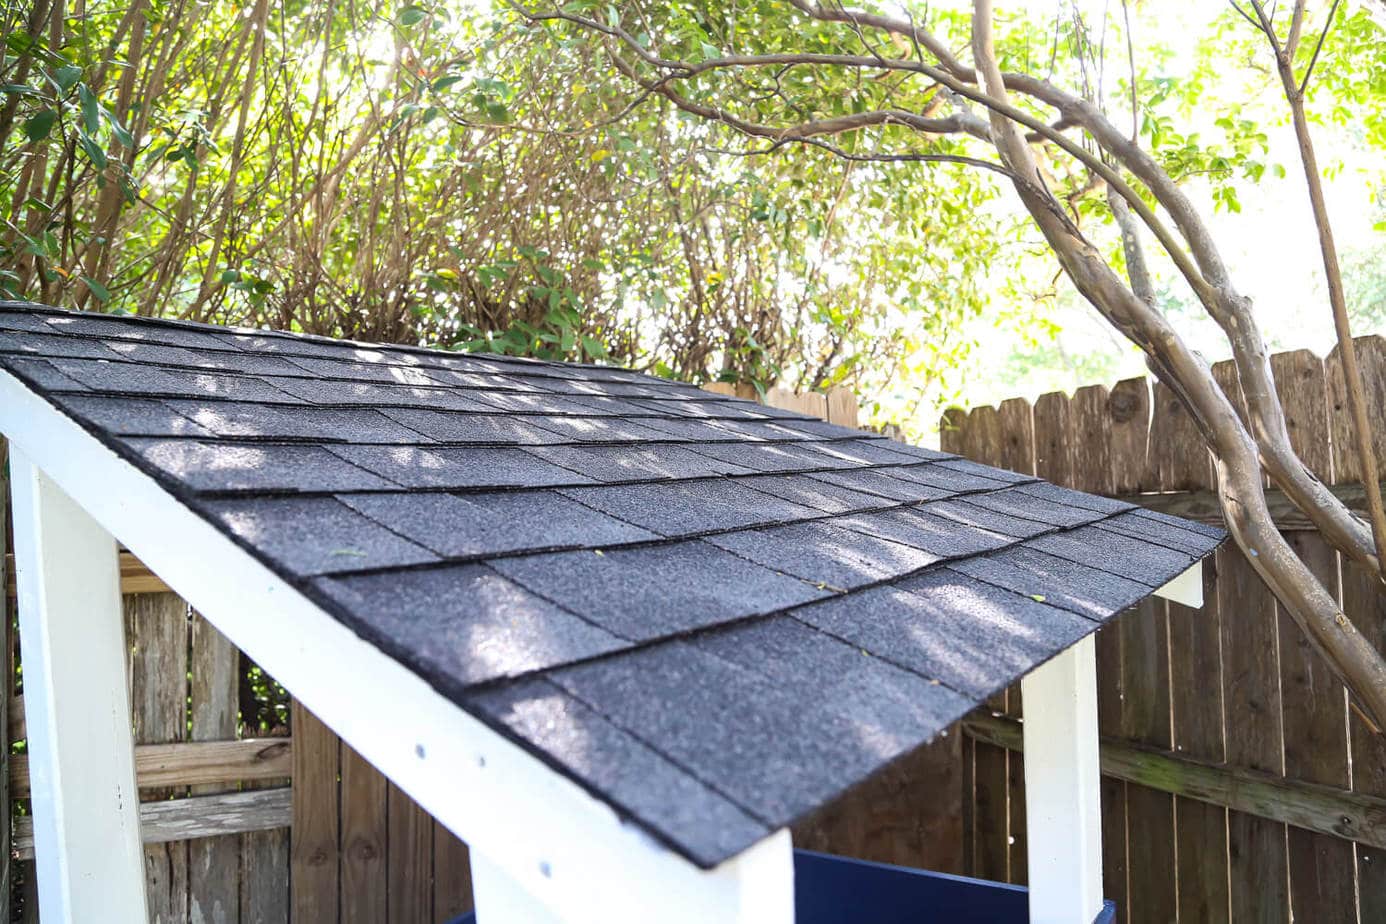 How to install shingles on a playhouse roof